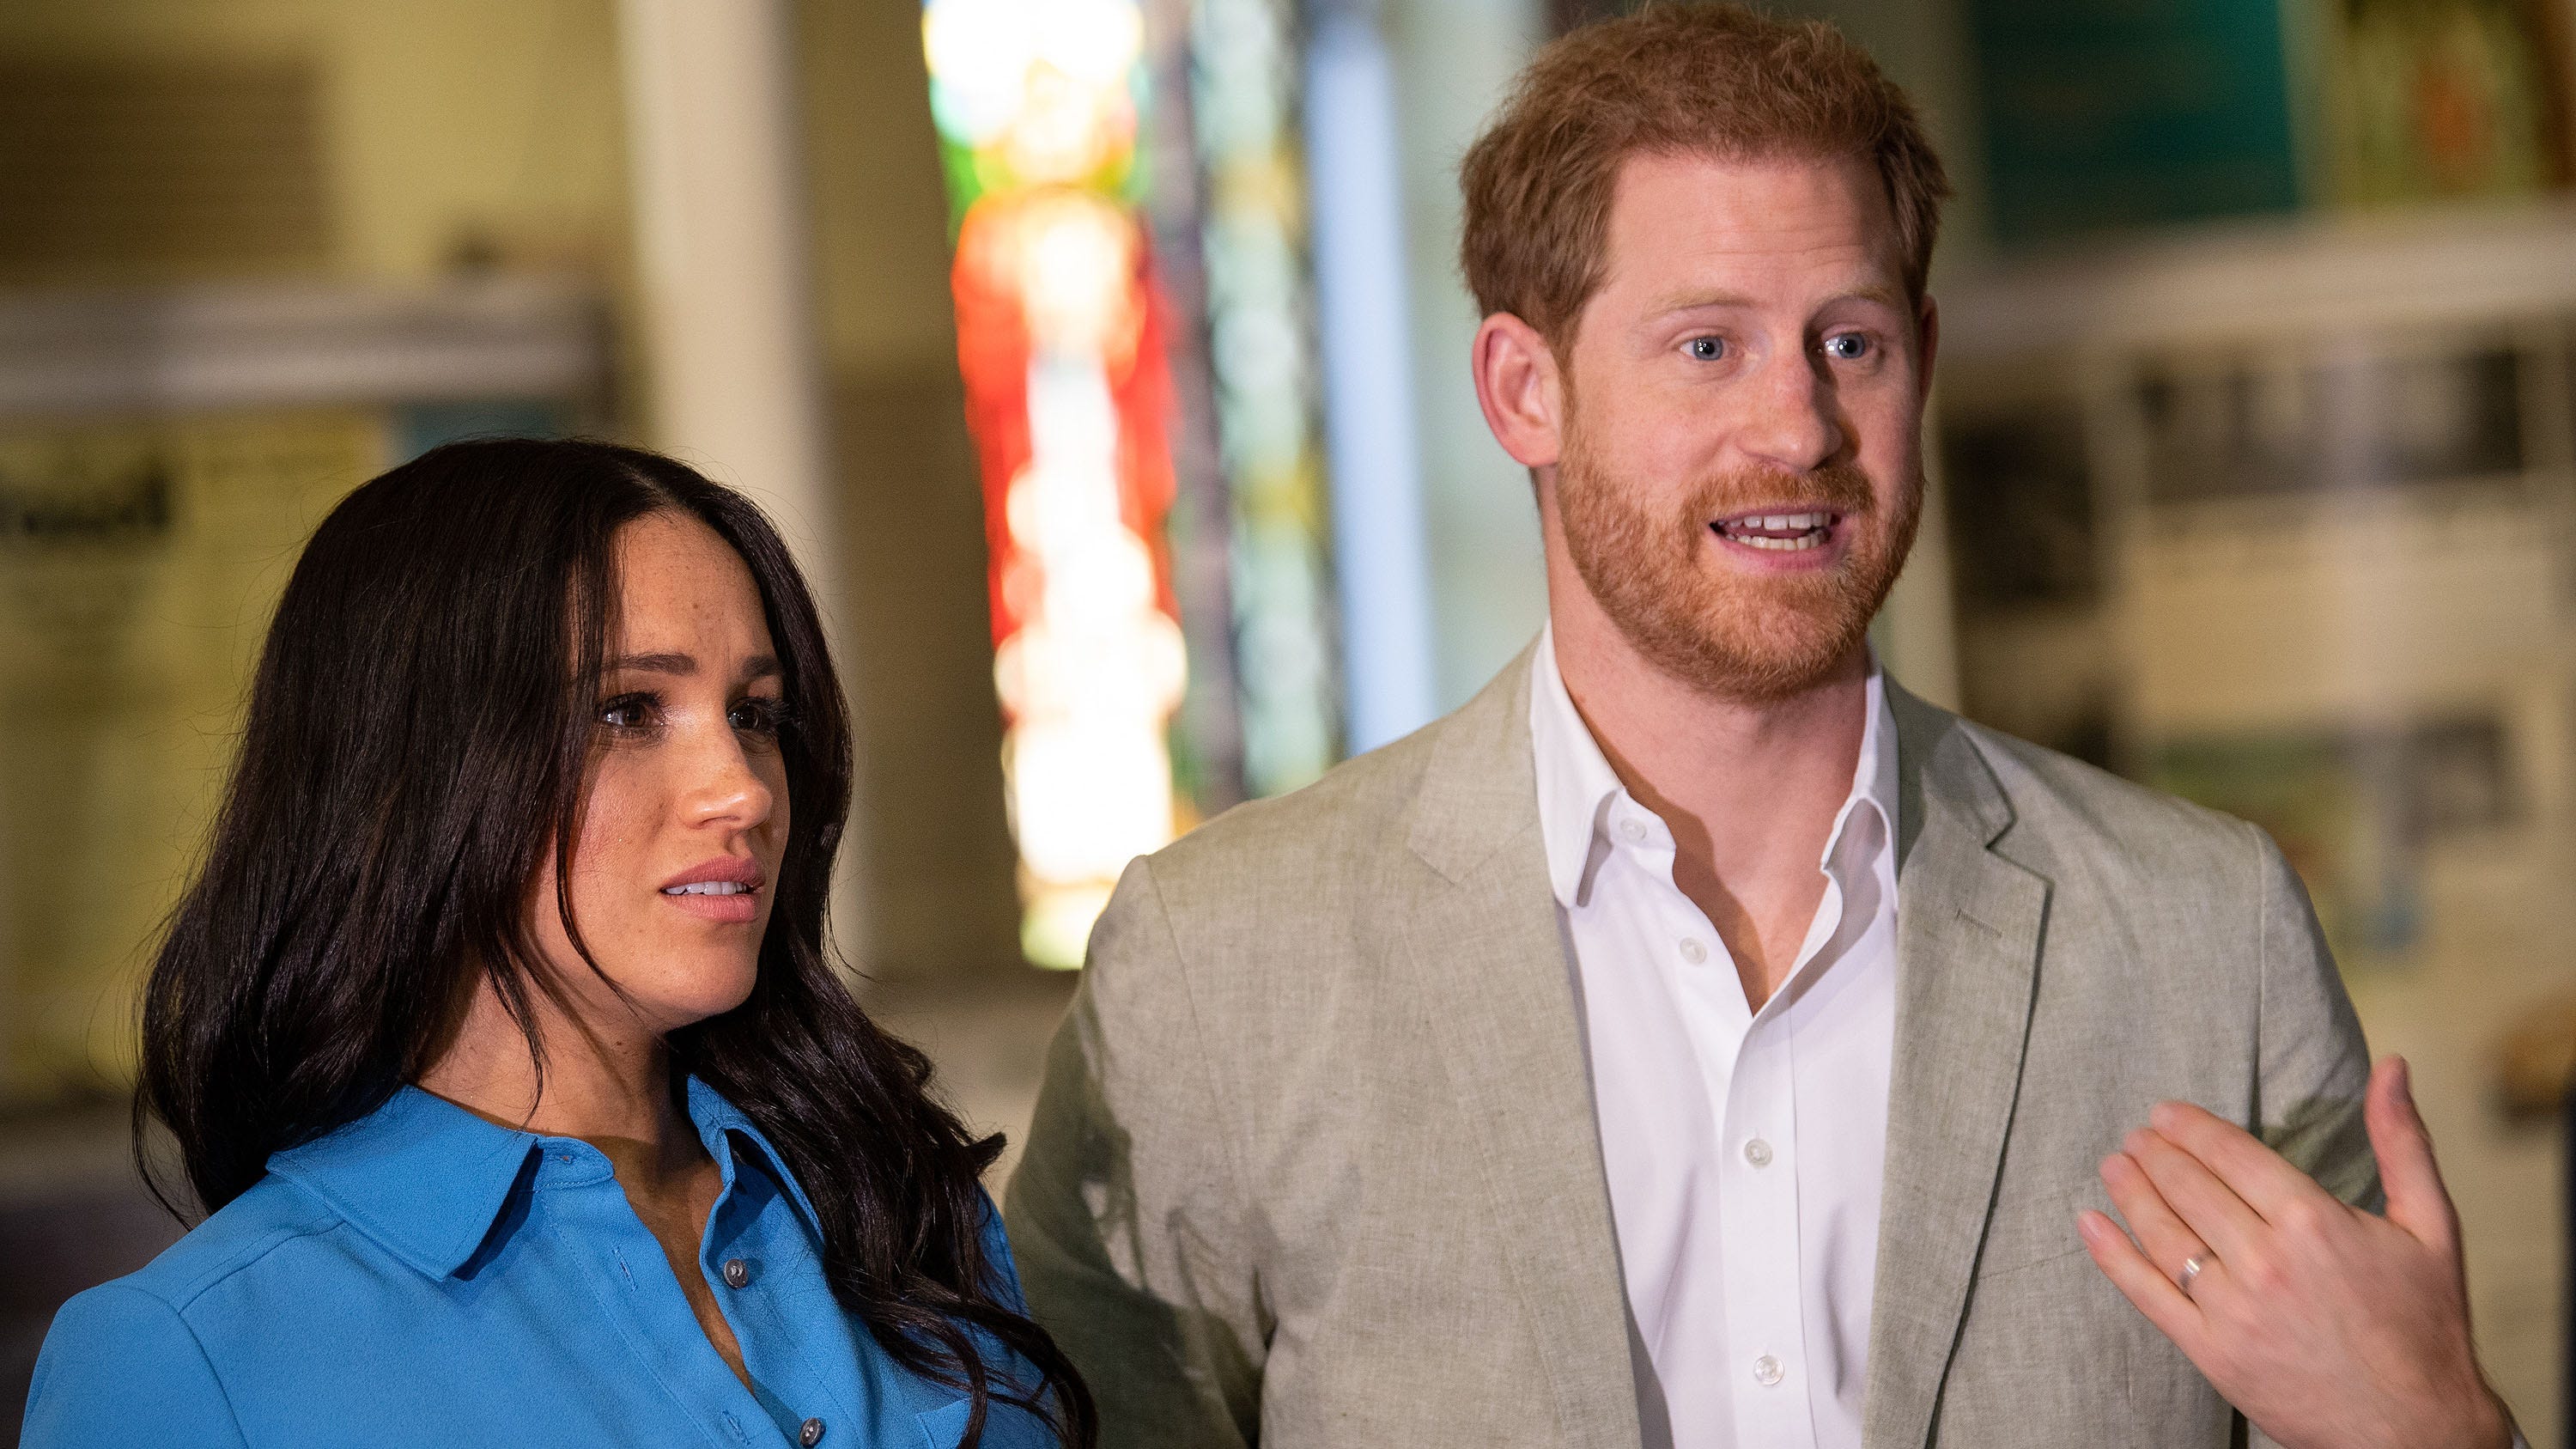 Prince Harry says Meghan Markle ‘cried in her pillow’ over bullying allegations: ‘That’s heartbreaking’